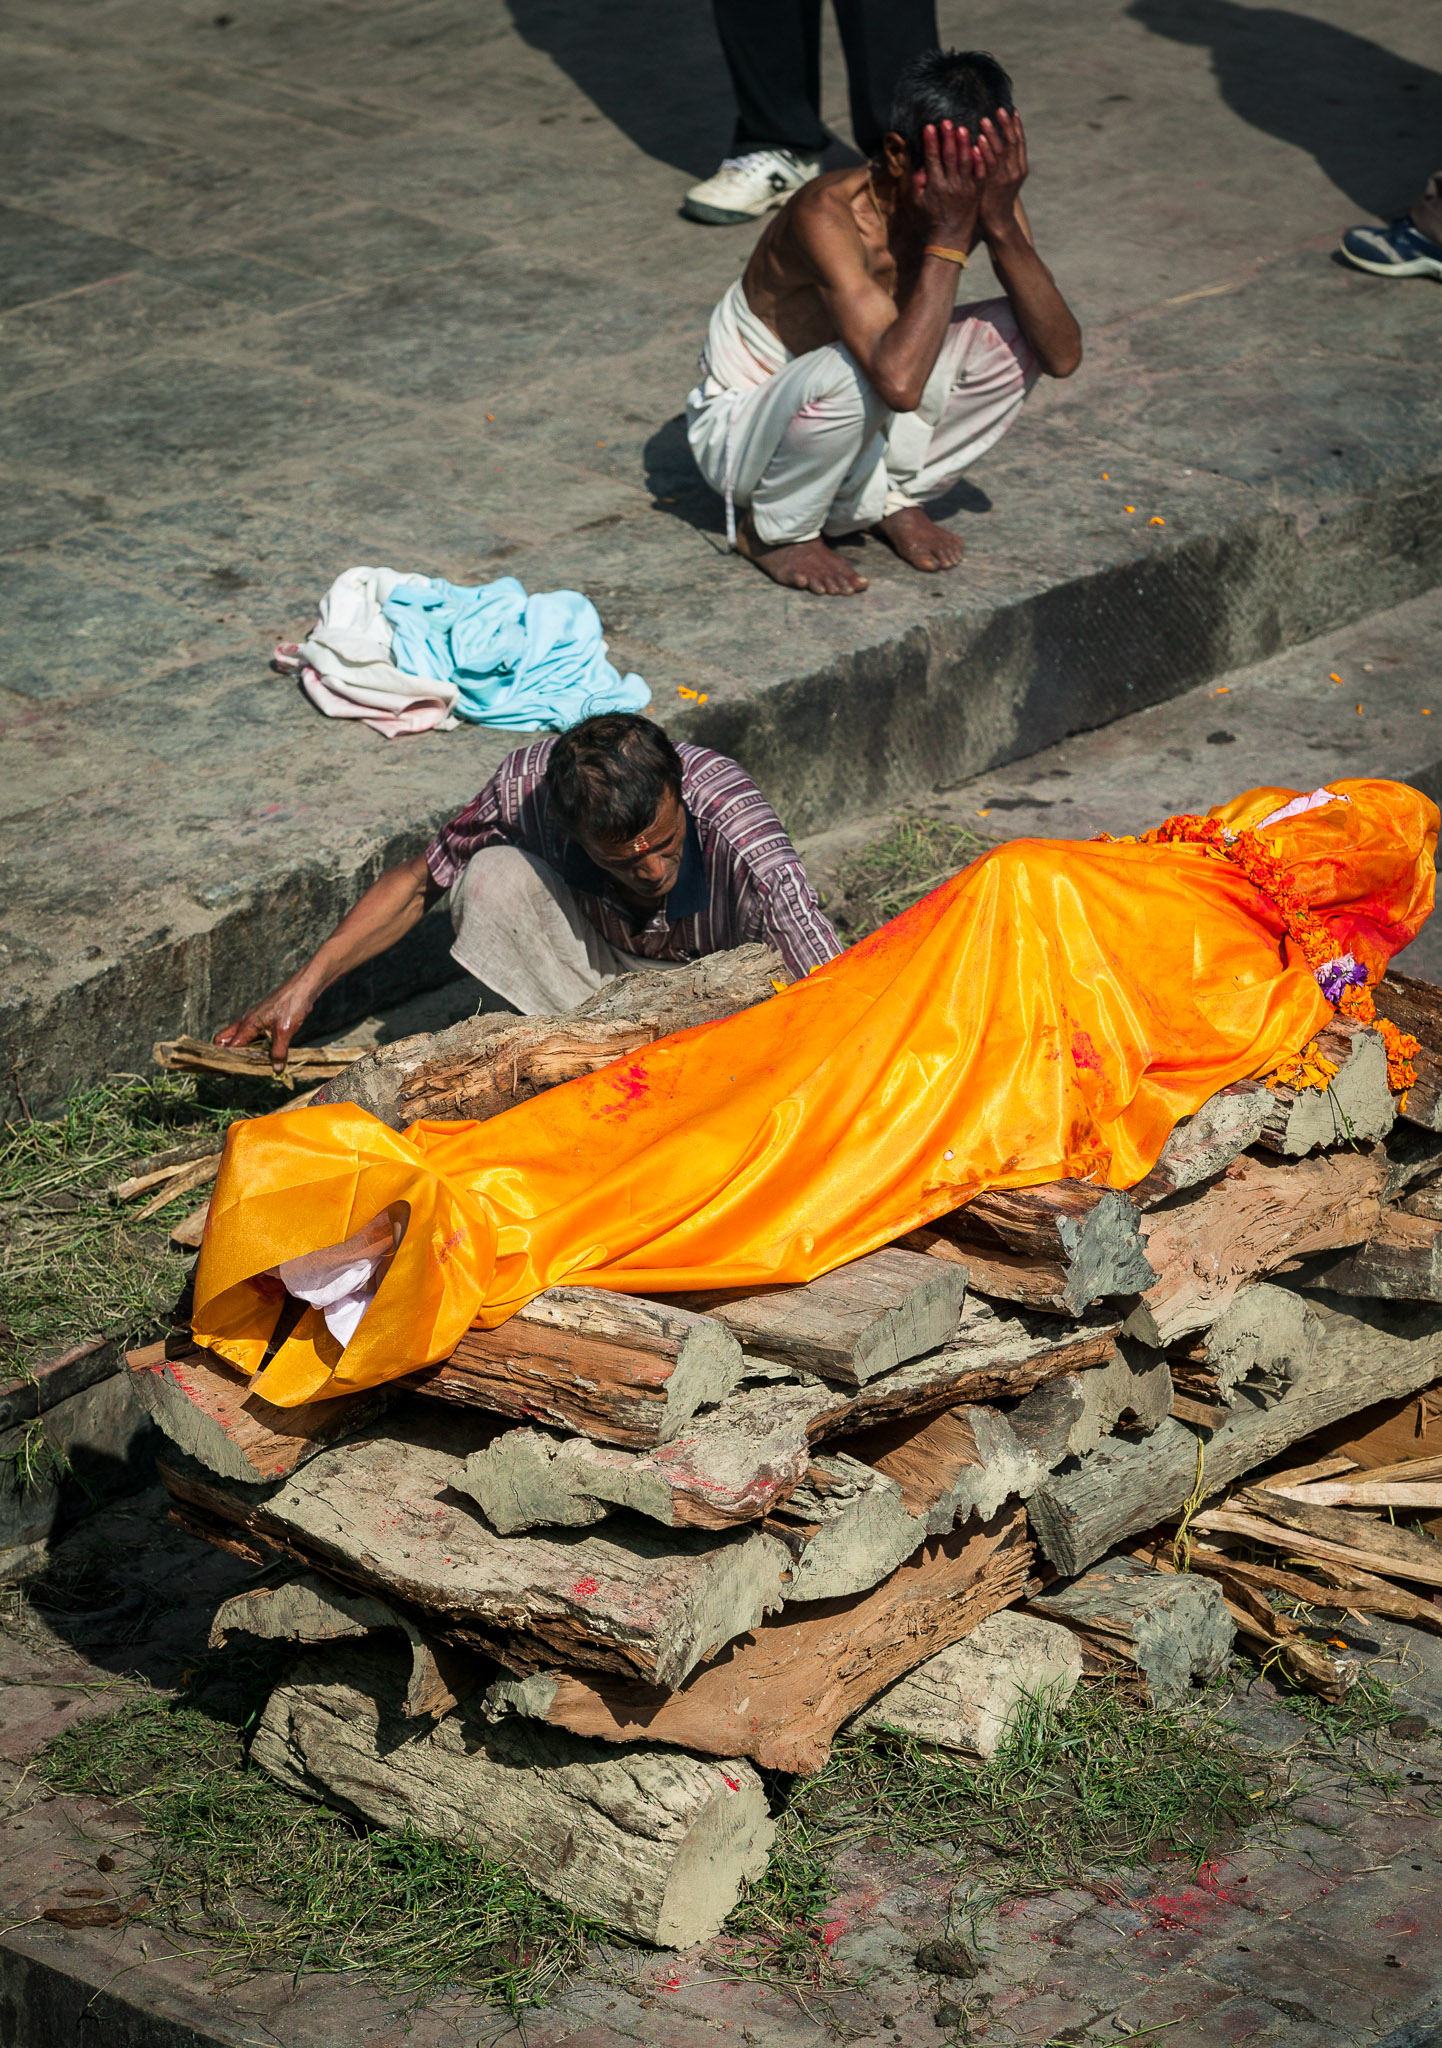 Cremation ceremony at Pashupatinath Temple